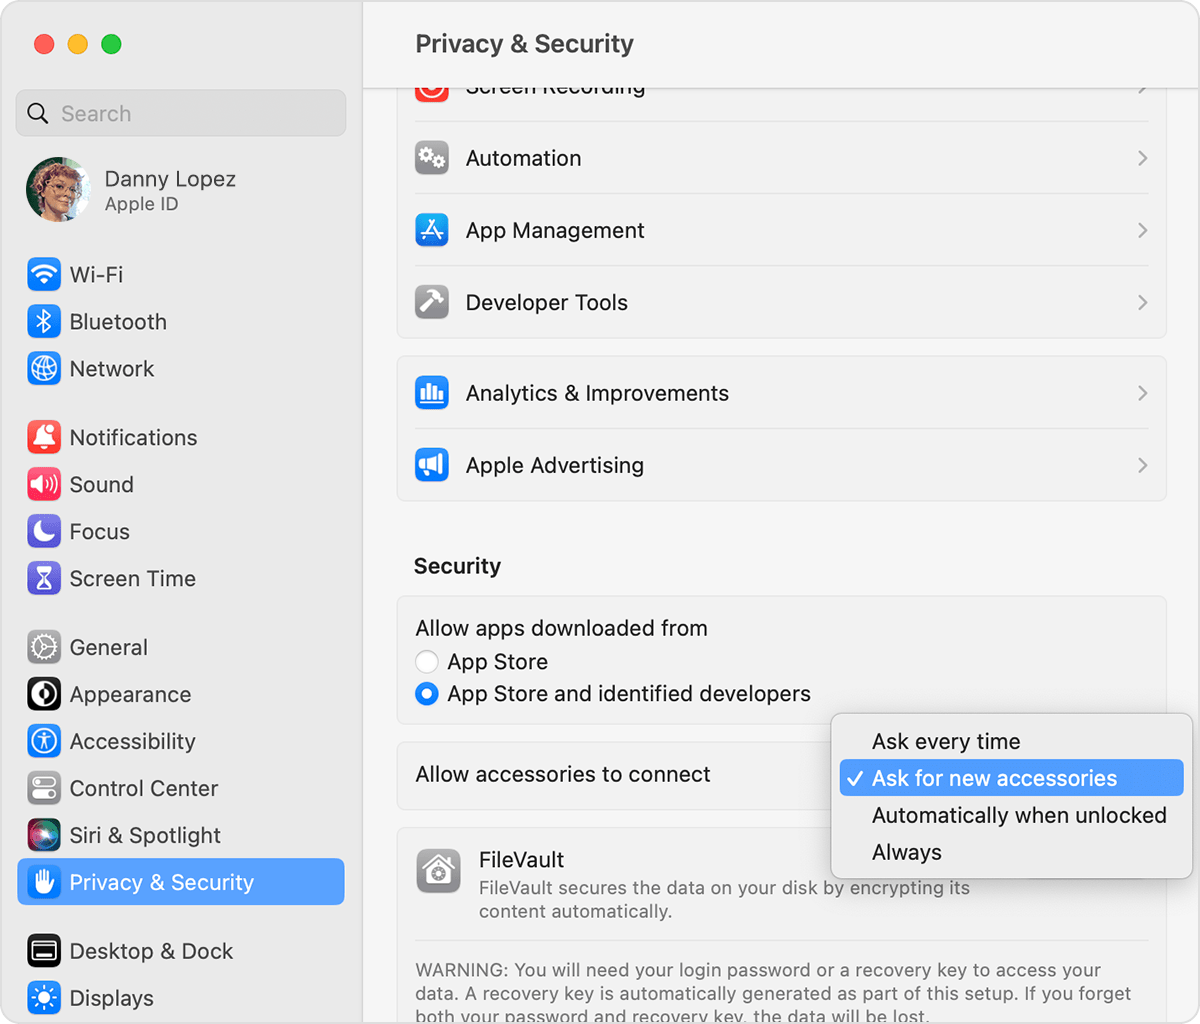 Change the Allow accessories to connect setting on your Mac laptop